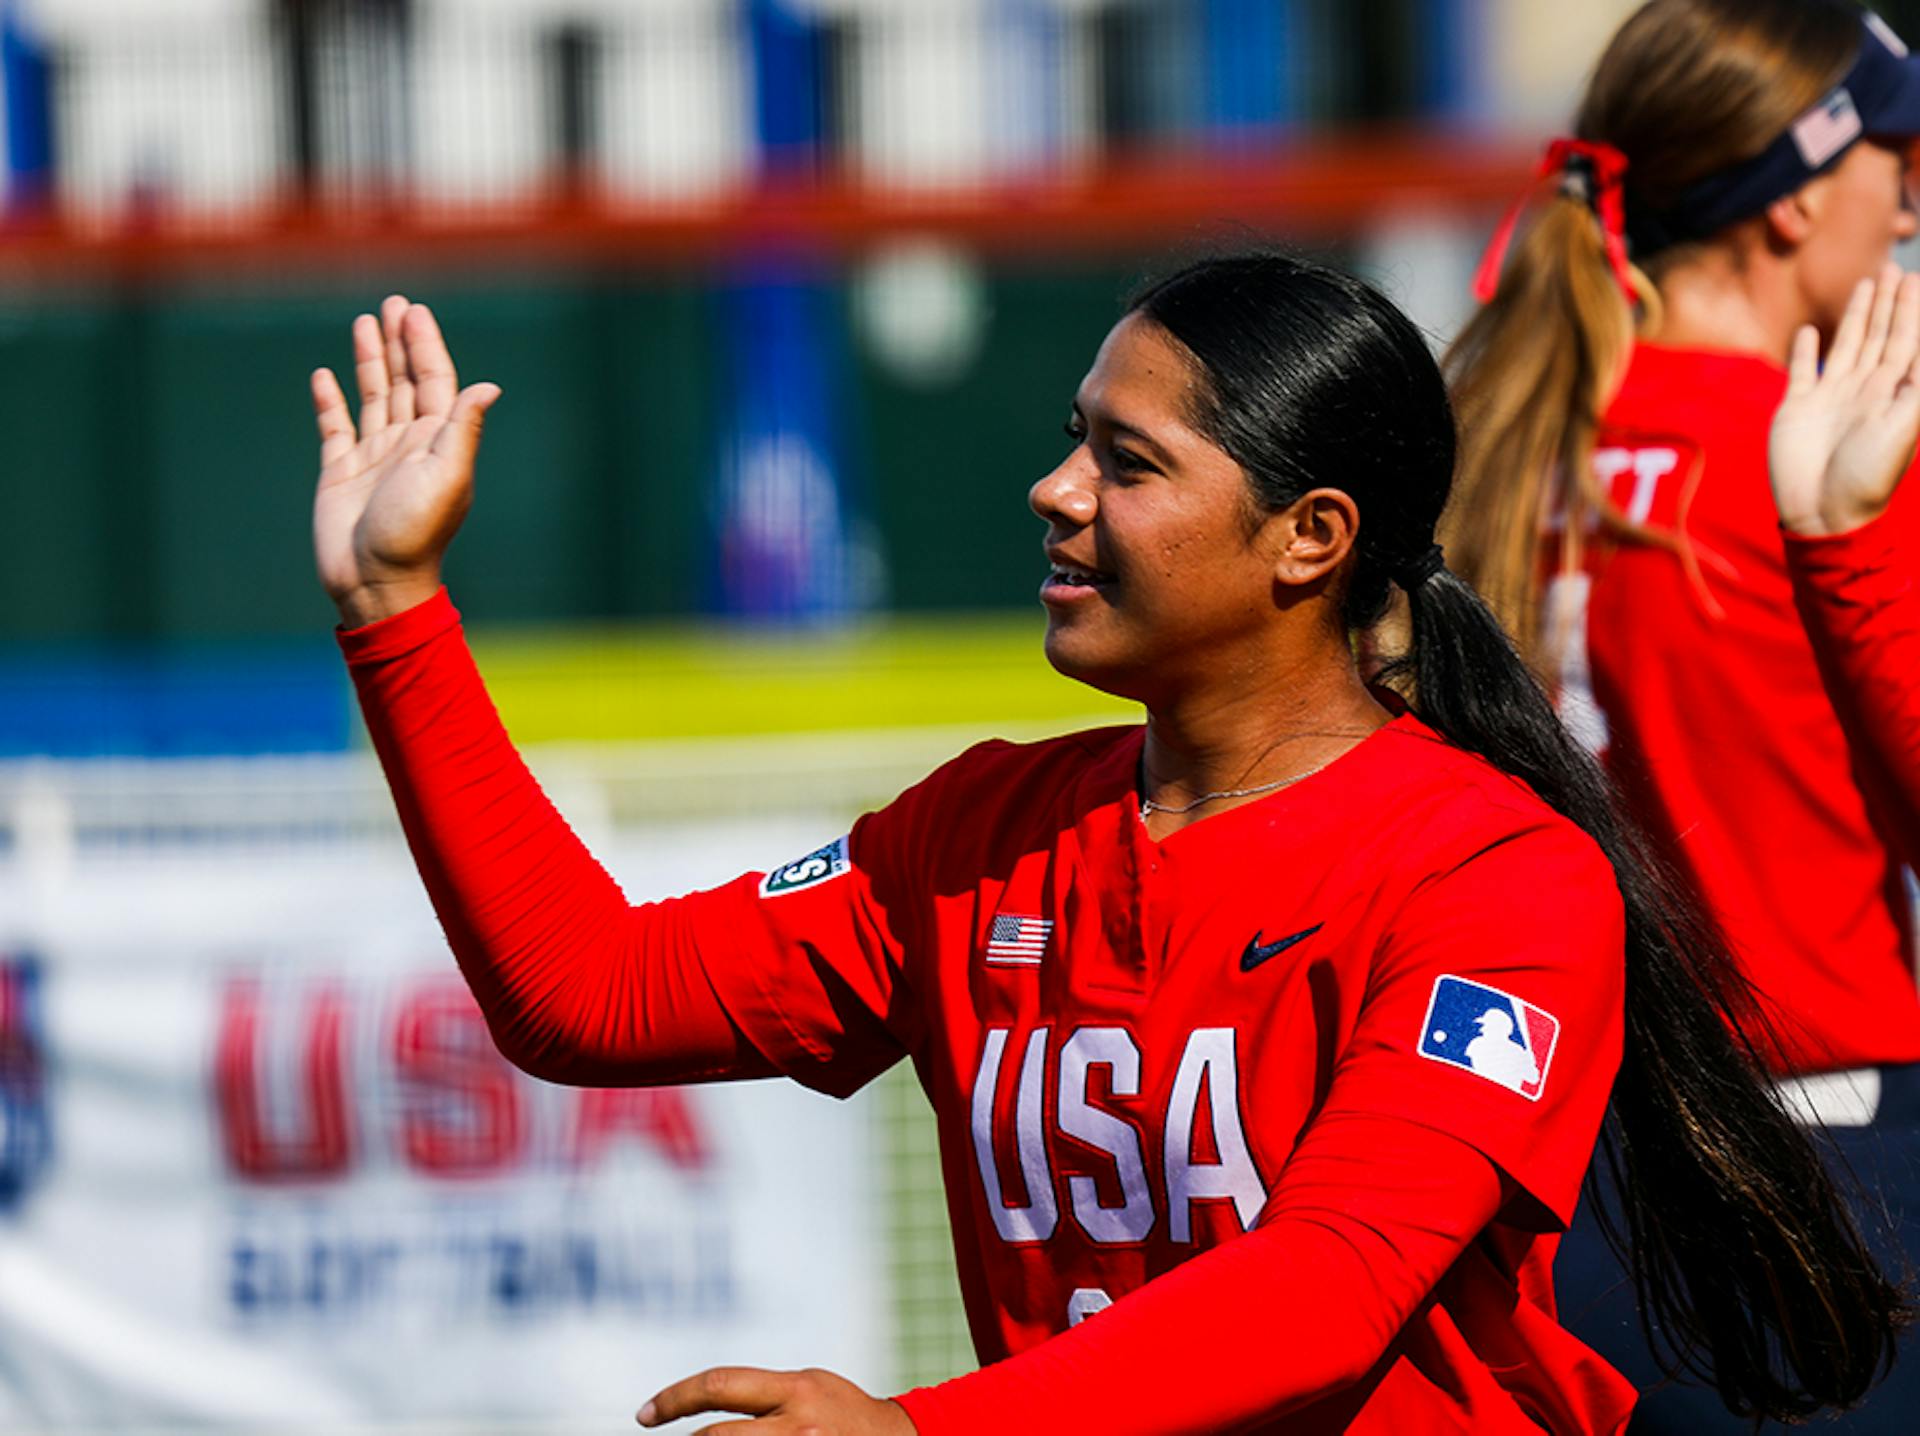 Athletes Unlimited Softball Roster Finalized, headlined by 23 Olympians